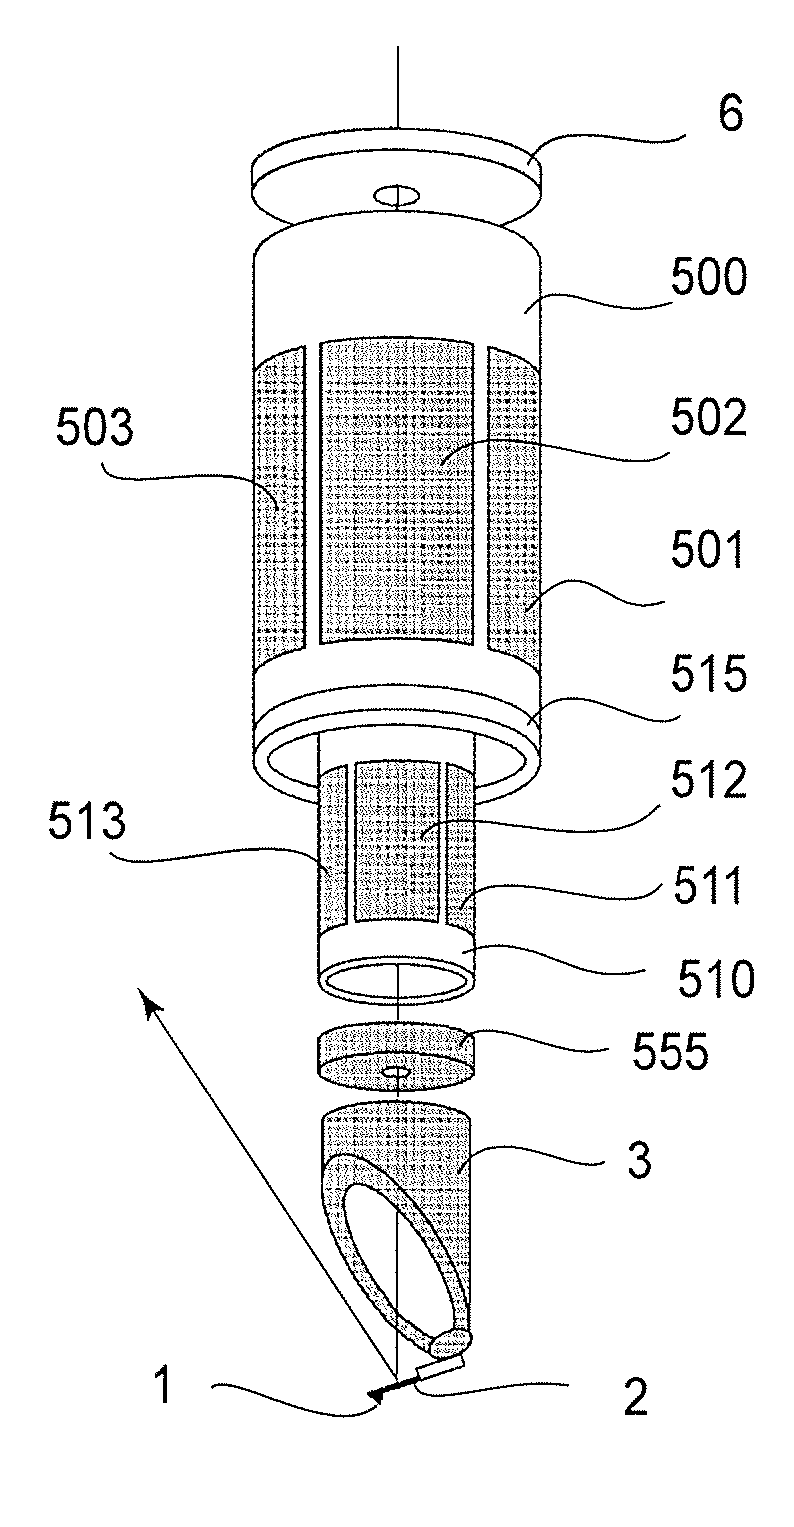 Scanning probe apparatus and drive stage therefor